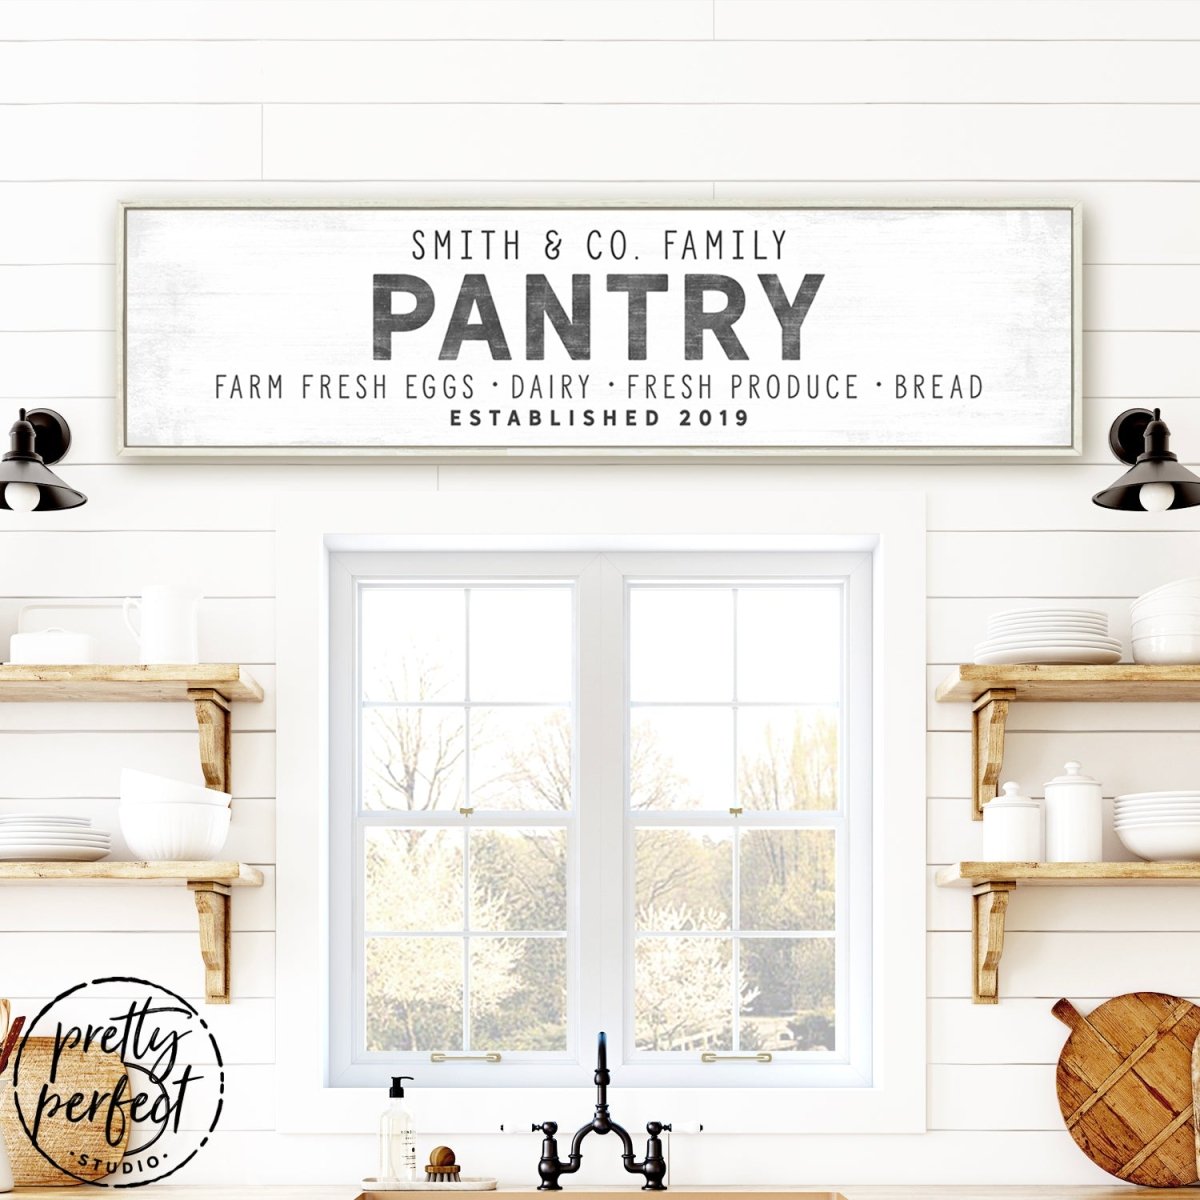 Personalized Pantry Sign With Name & Established Date in Kitchen - Pretty Perfect Studio